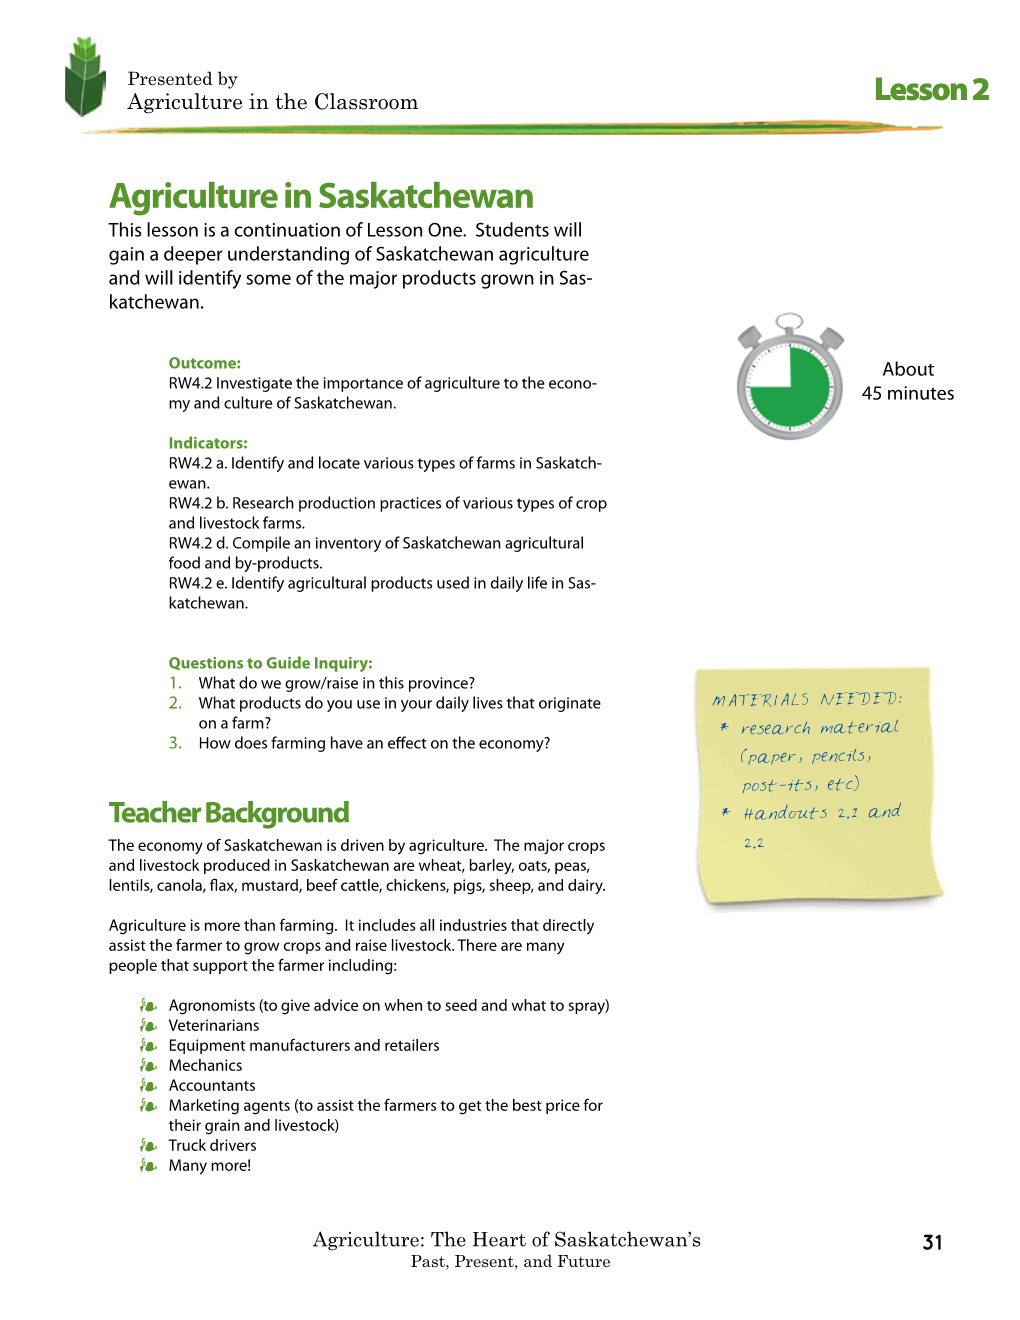 Agriculture in Saskatchewan This Lesson Is a Continuation of Lesson One